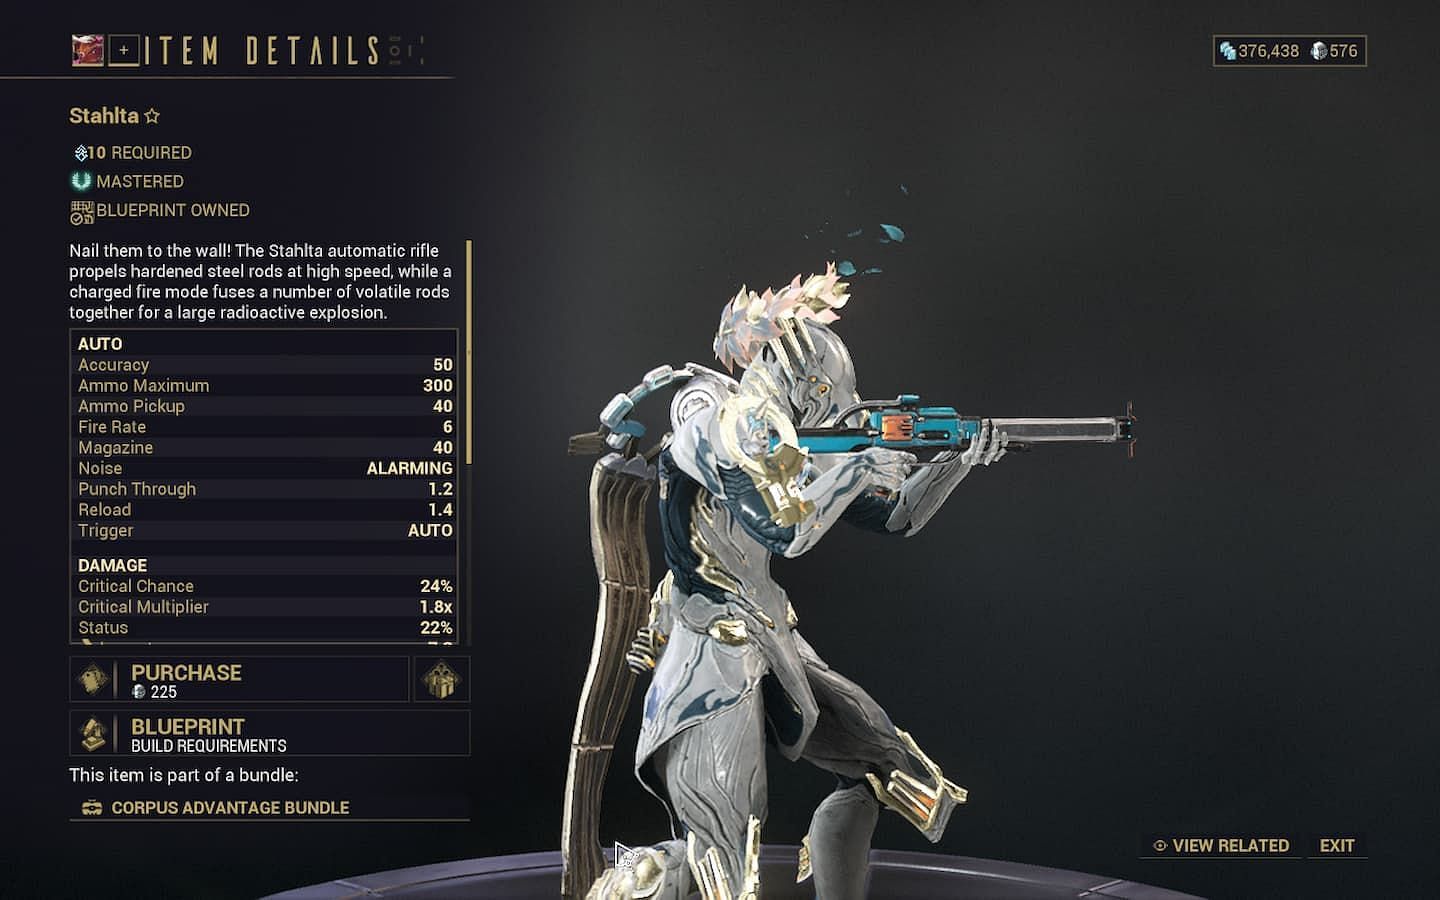 Stahlta is a criminally underrated weapon (Image via Digital Extremes)